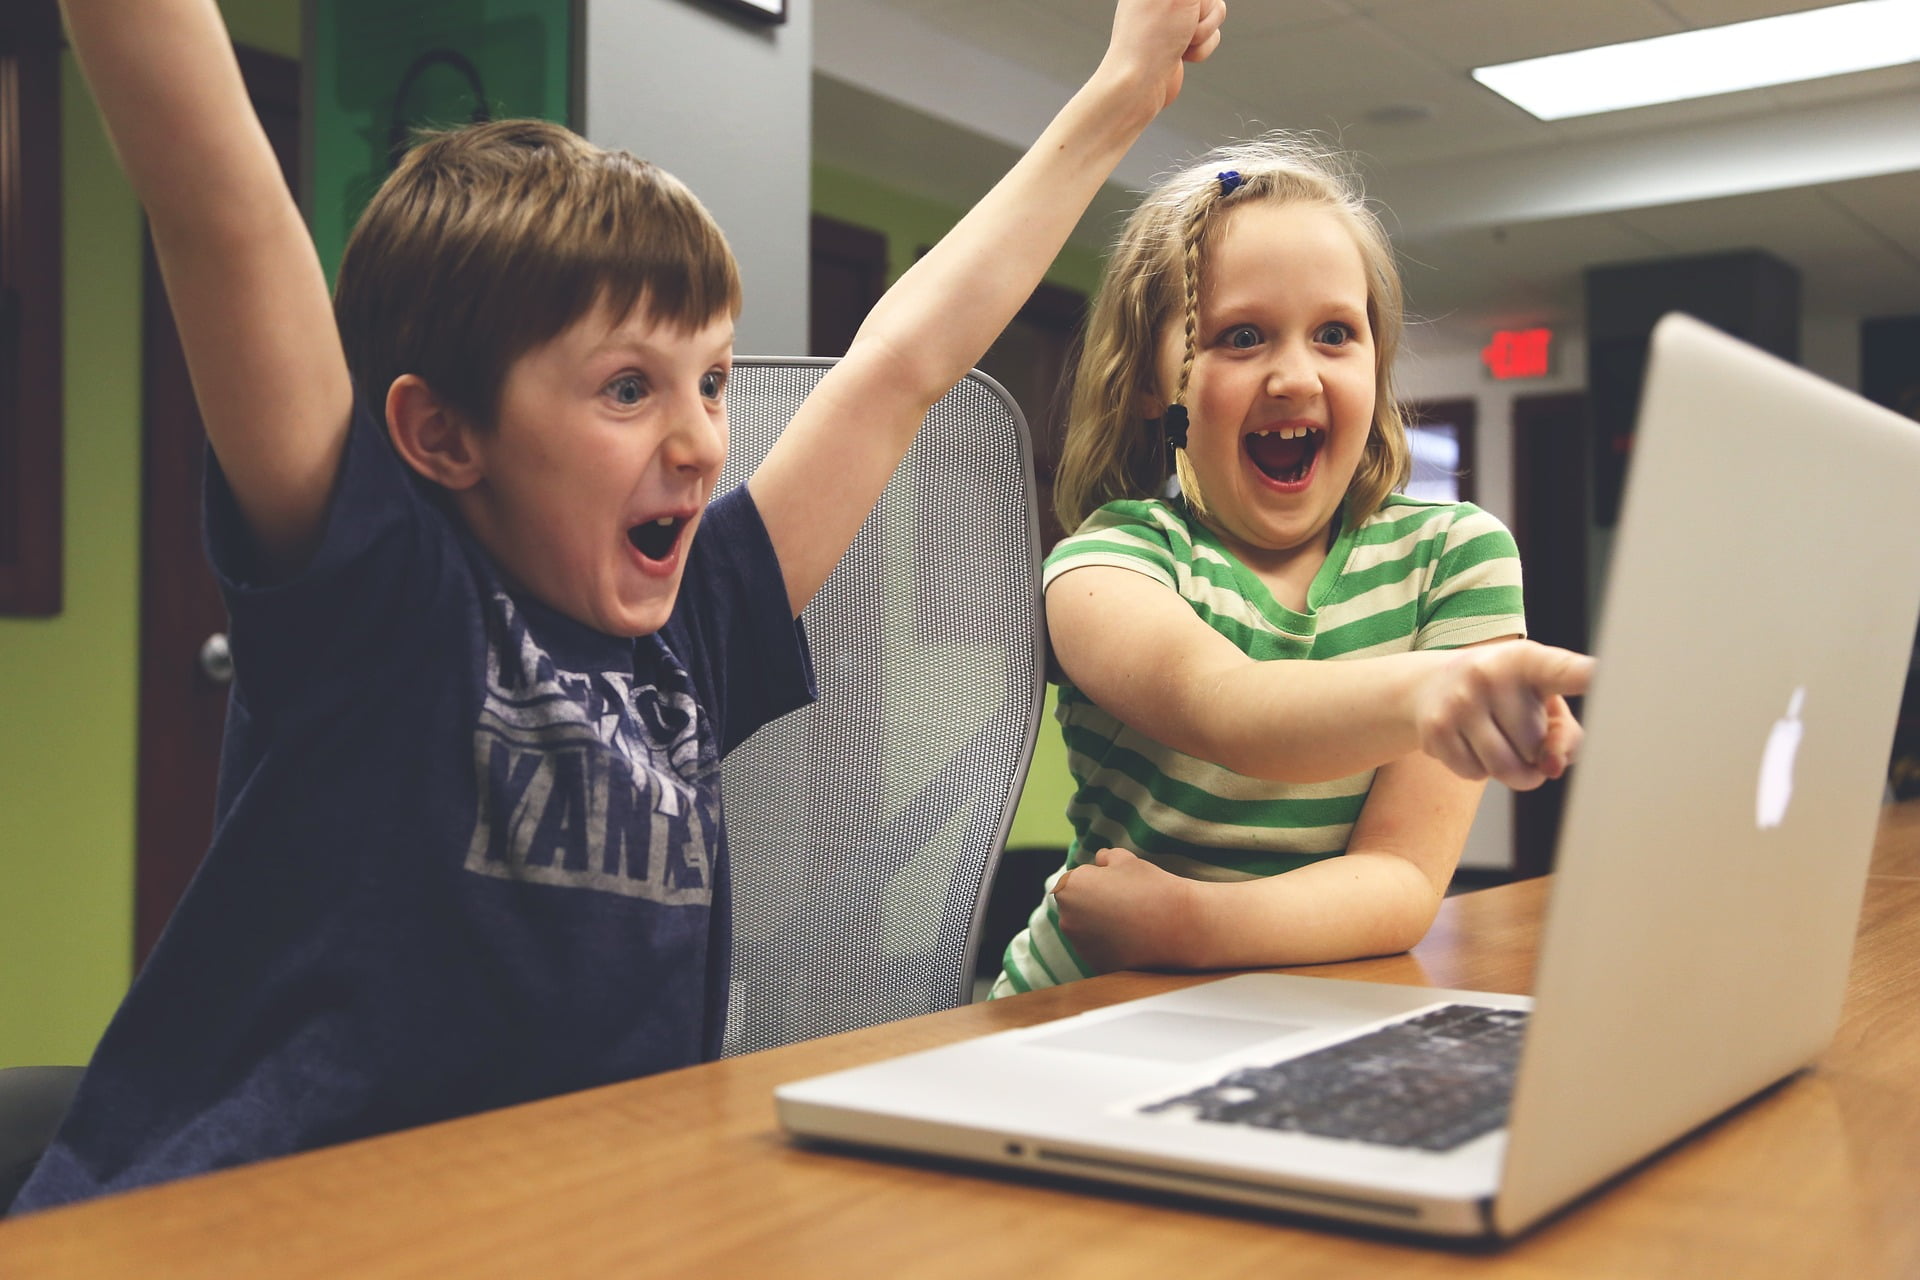 Children smiling and excited to be on a laptop